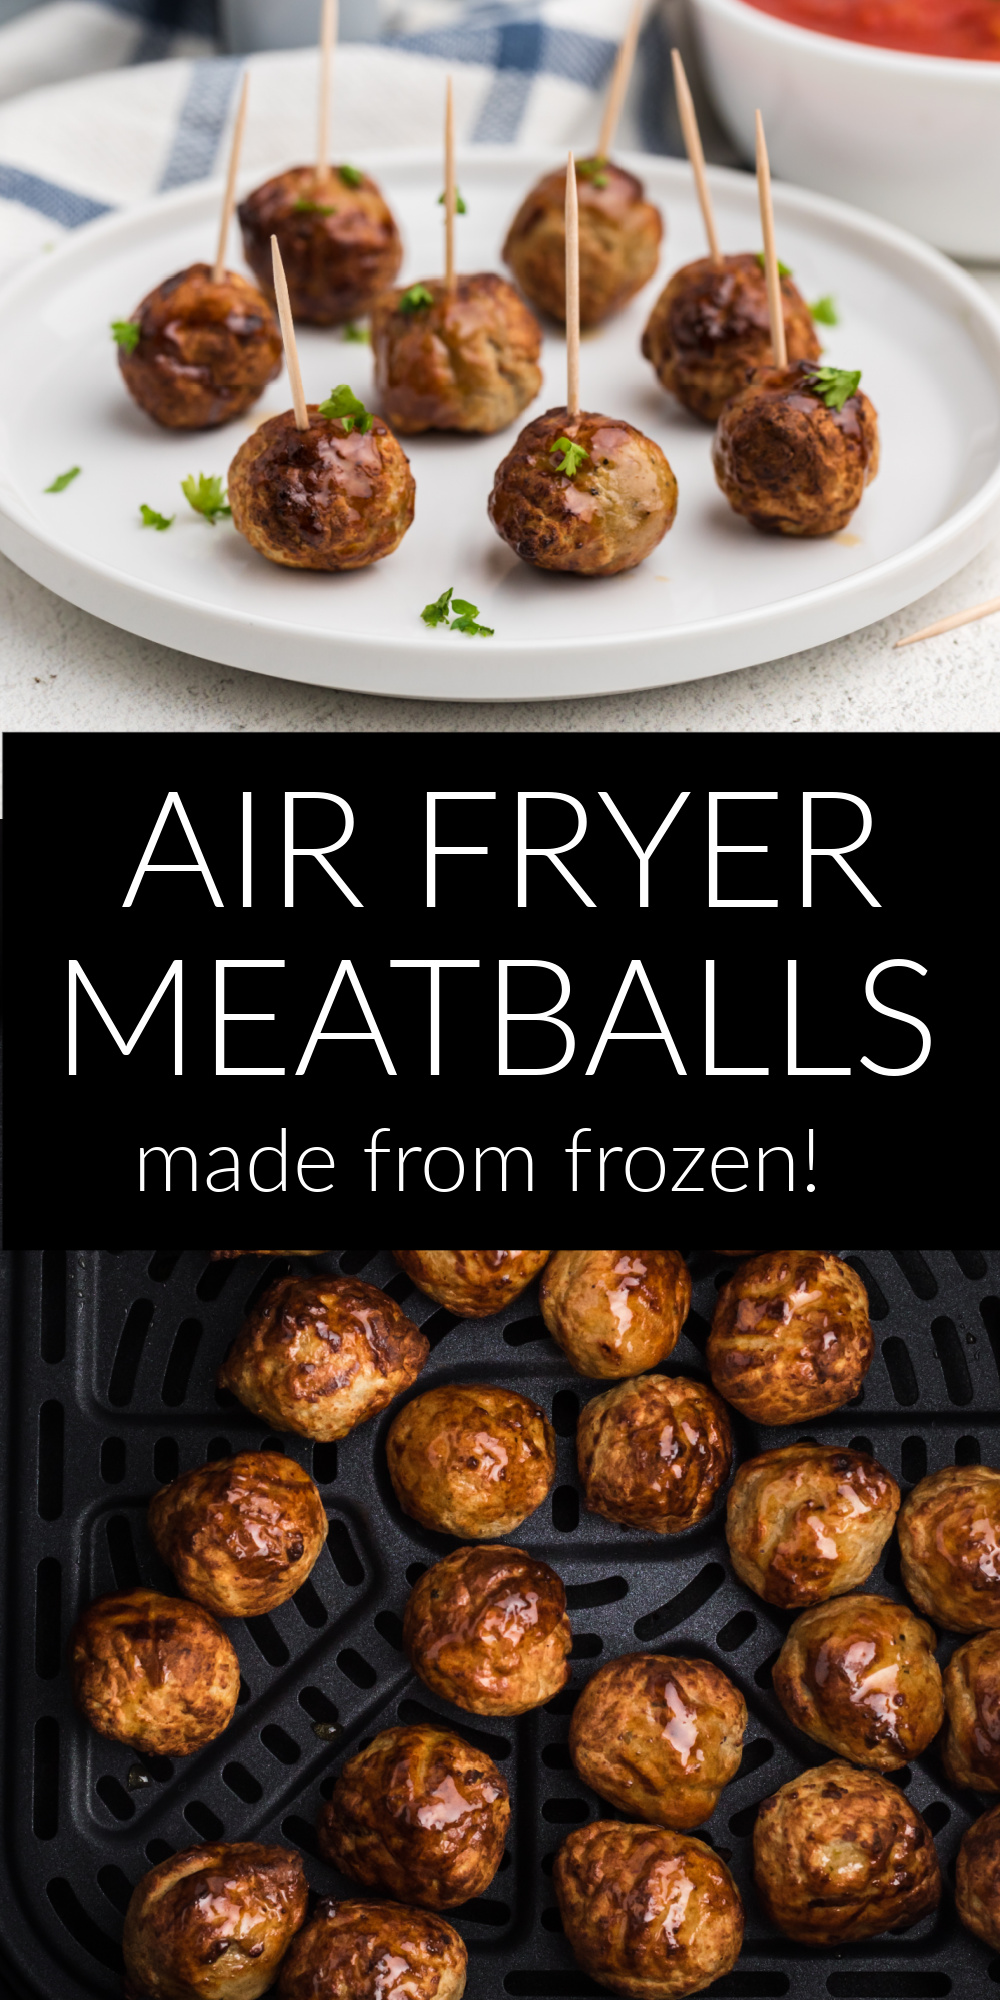 Frozen Meatballs cooked in an air fryer -  taste like you spent hours in the kitchen making them, but in reality, they're really simple to prepare. On the outside, they are crispy and flavorful, while on the inside, they are savory, juicy, and tender. They're wonderful! Air-fried meatballs make a great appetizer or a hearty dinner when served over pasta.